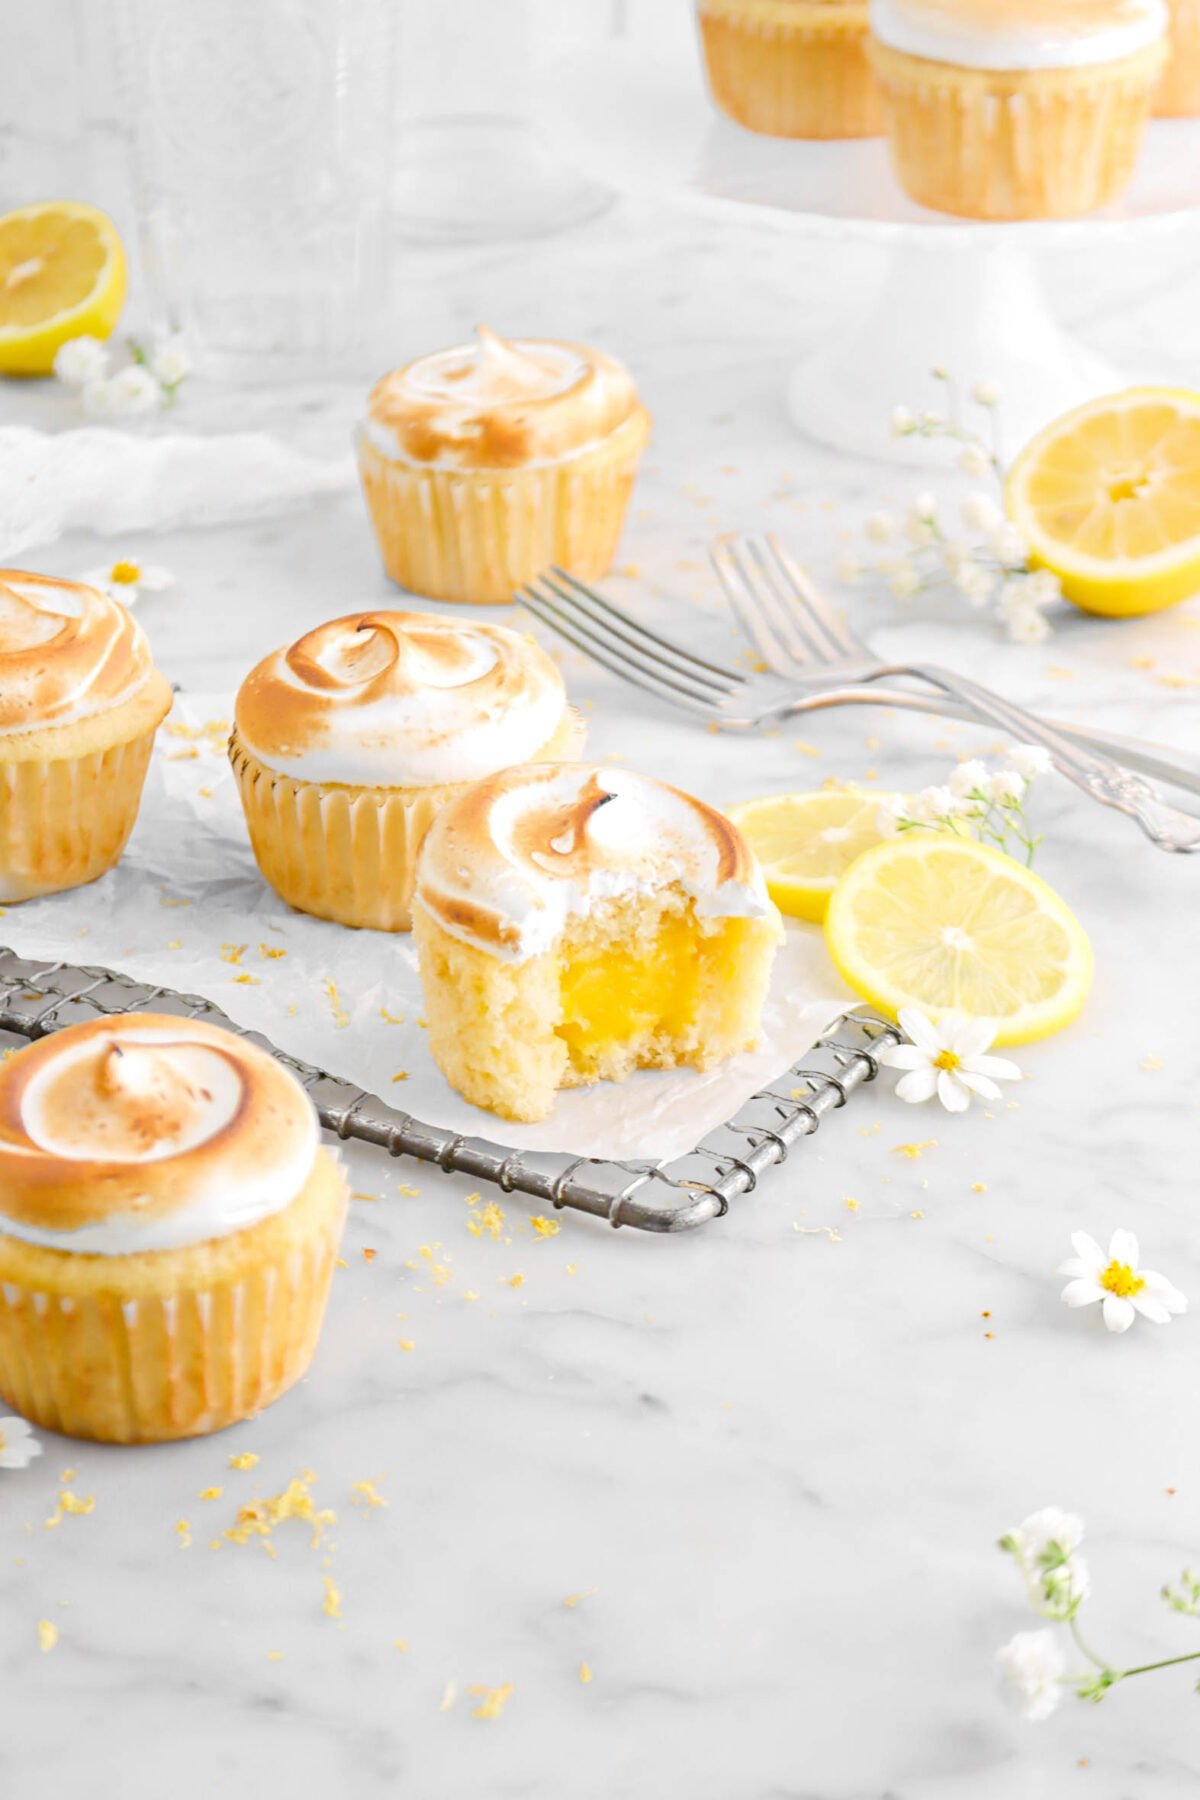 angled shot of five cupcakes with flowers and lemons around, more cupcakes on white cake stand behind